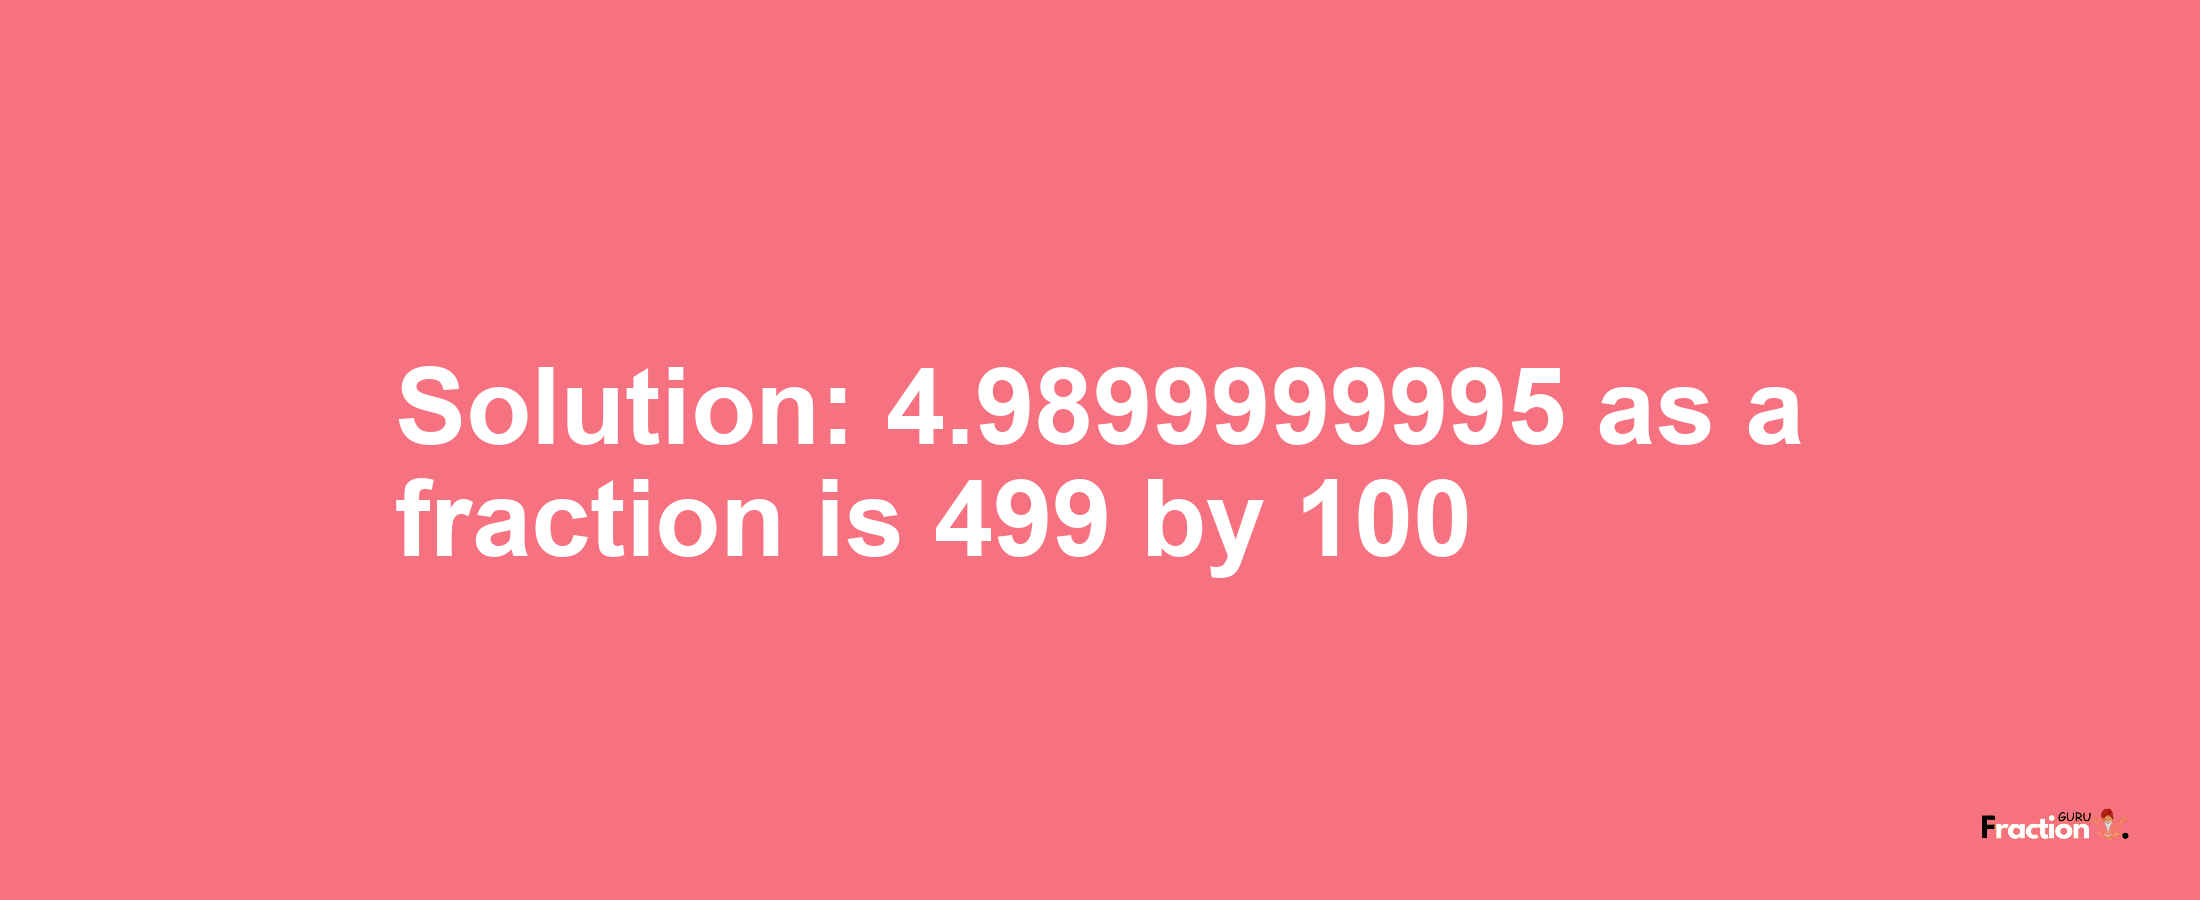 Solution:4.9899999995 as a fraction is 499/100